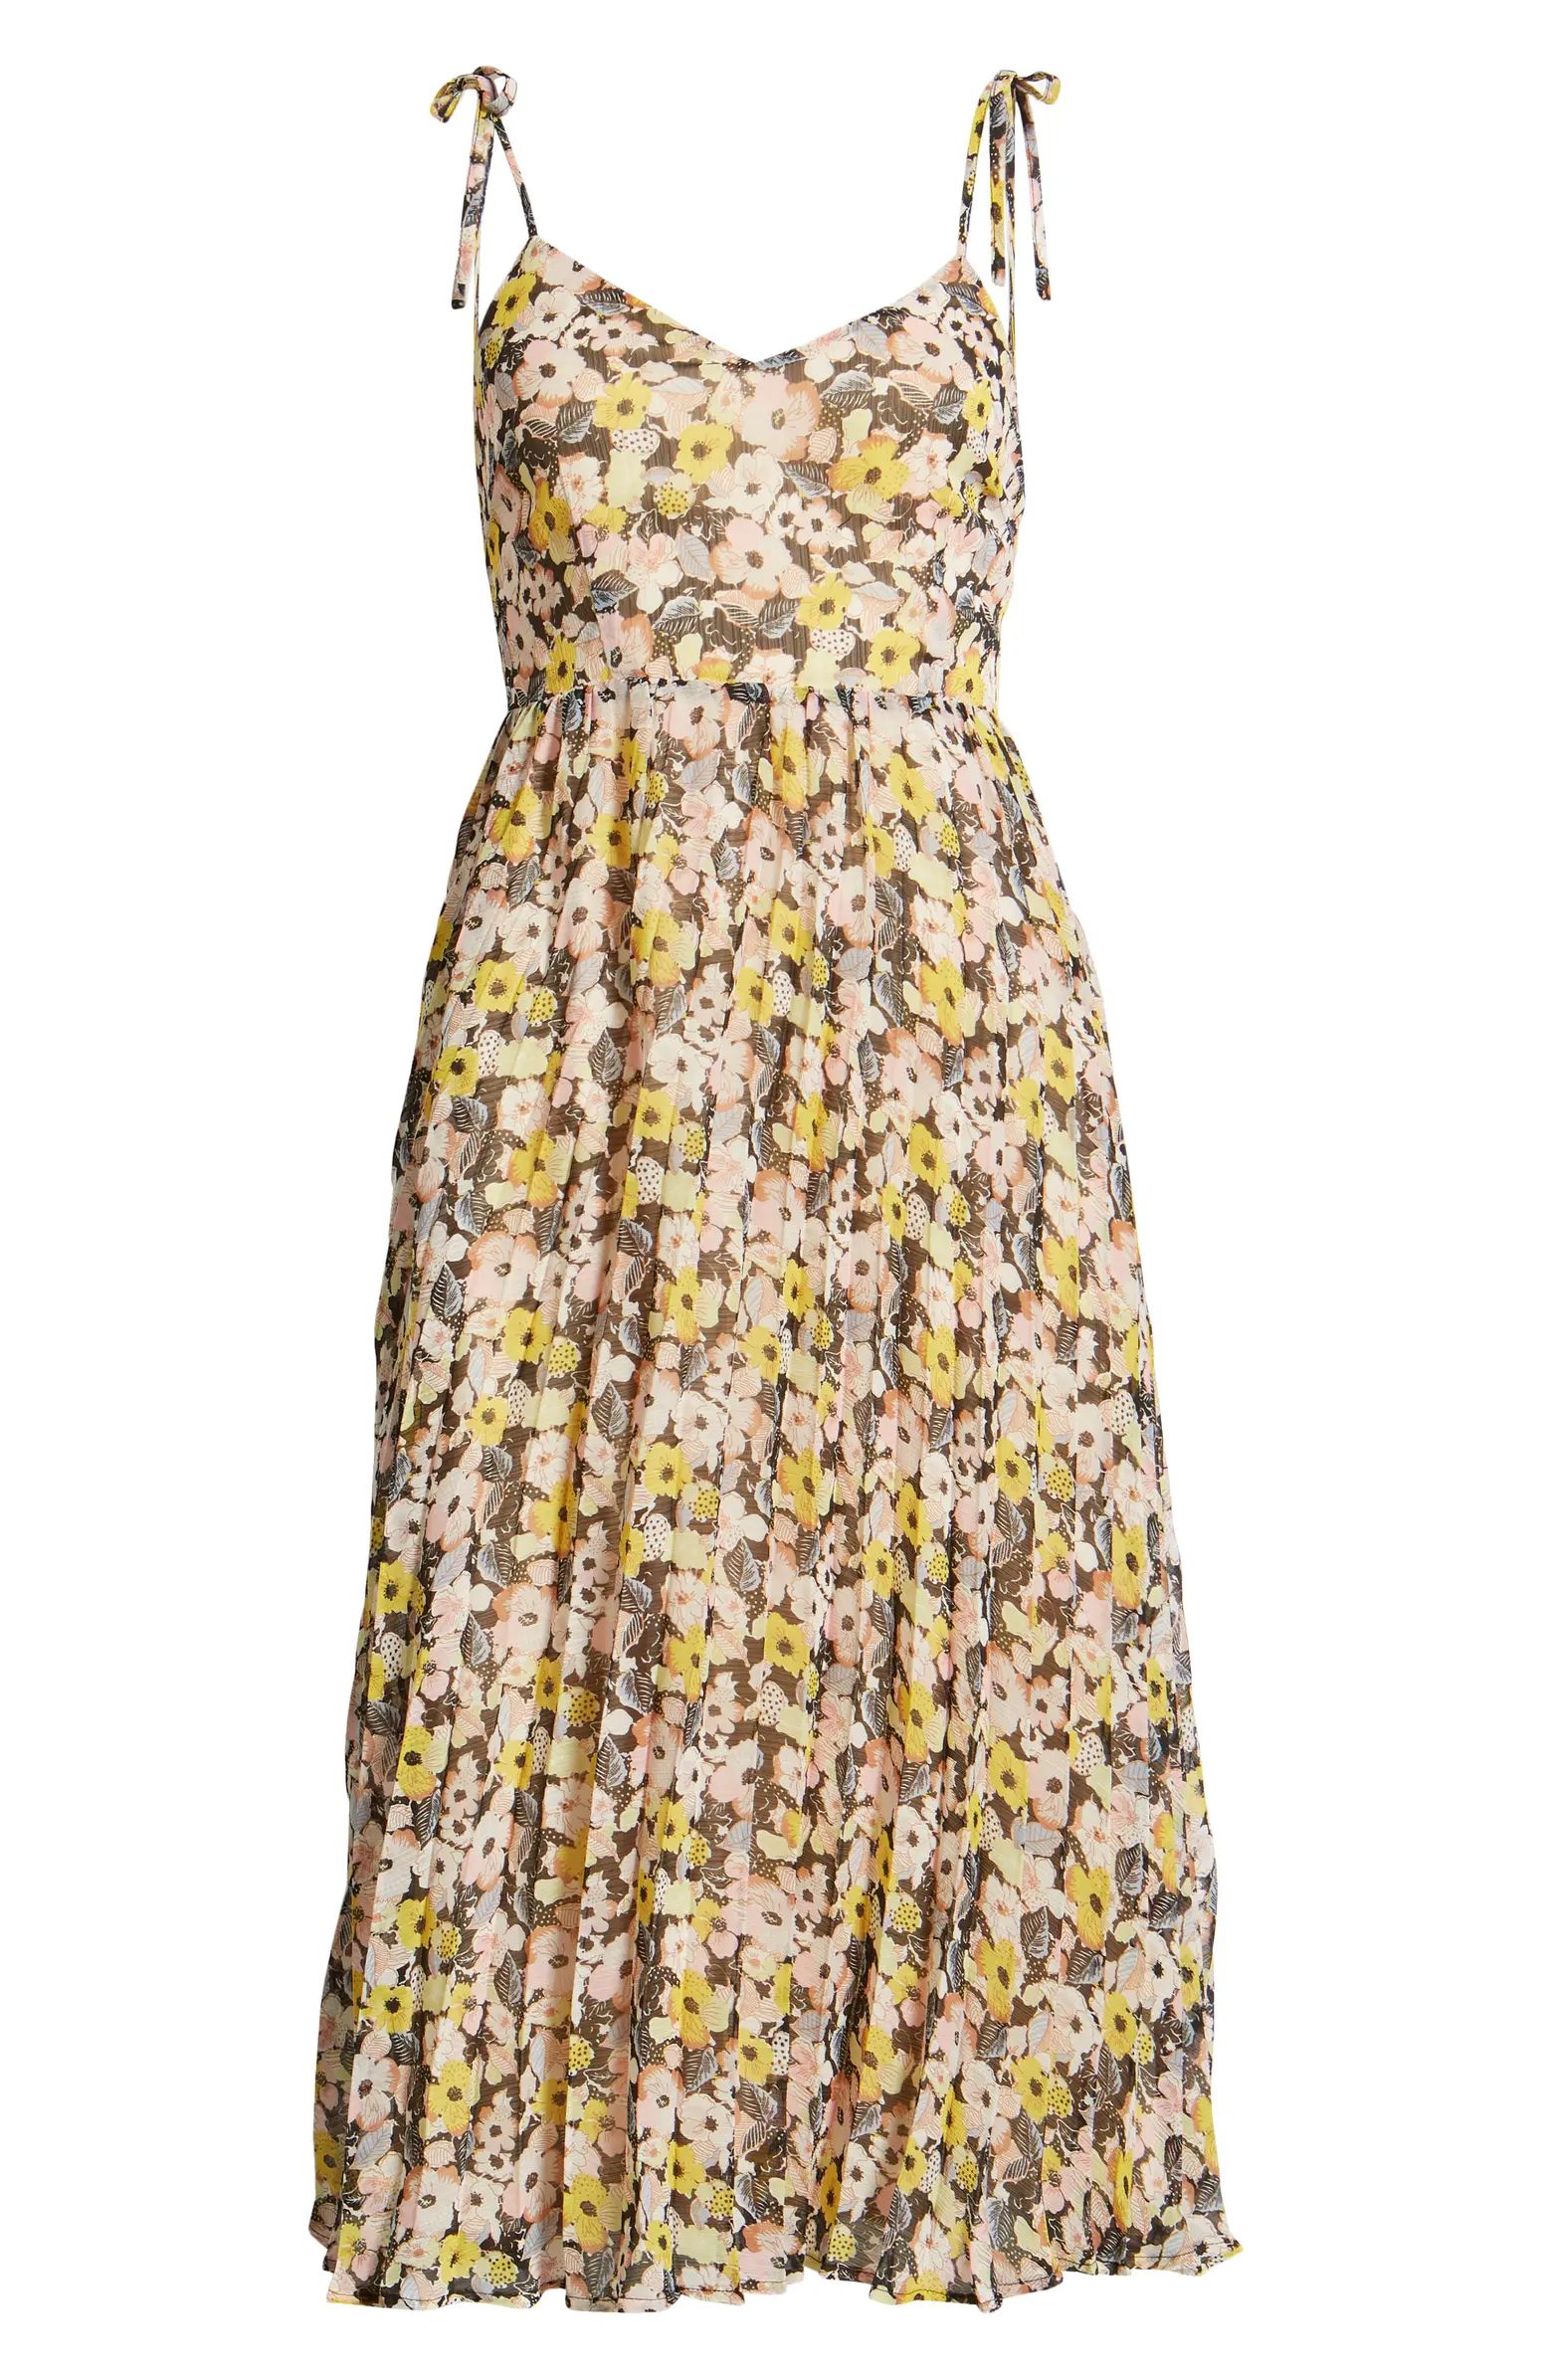 VICI Collection Floral Sleeveless Dress | Nordstrom | Nordstrom